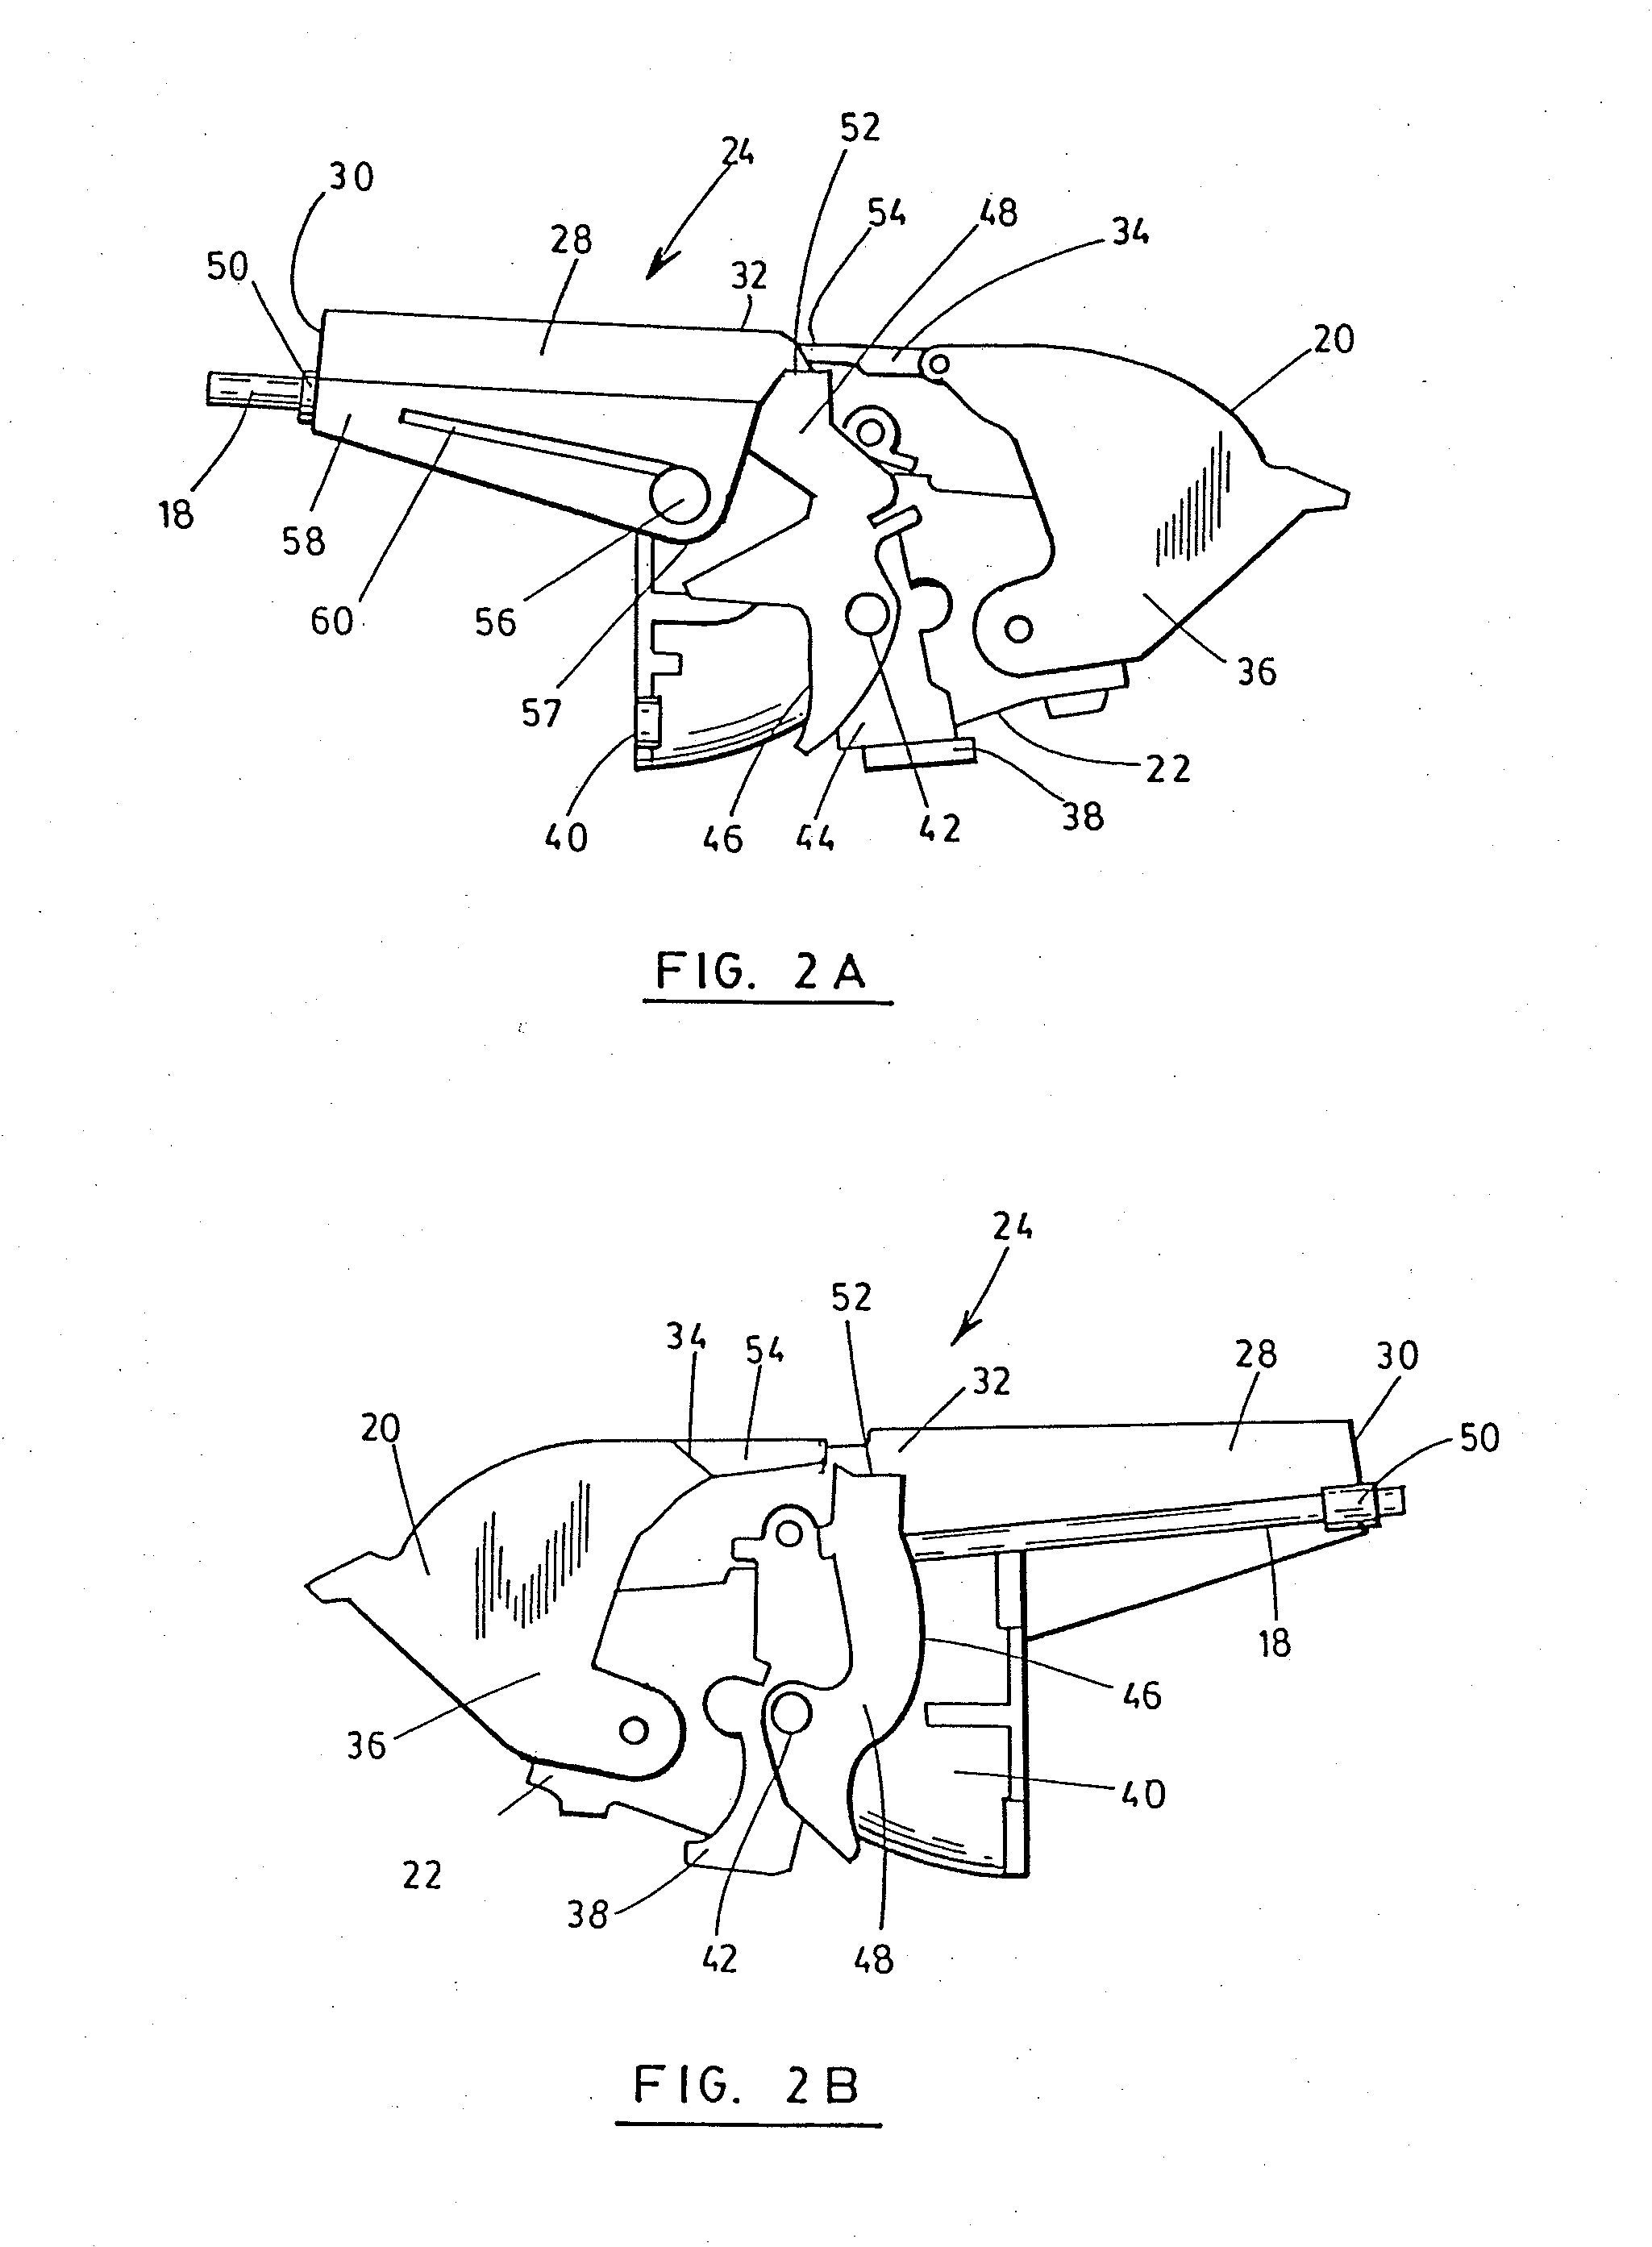 Electronically assisted reverse gate system for a jet propulsion watercraft